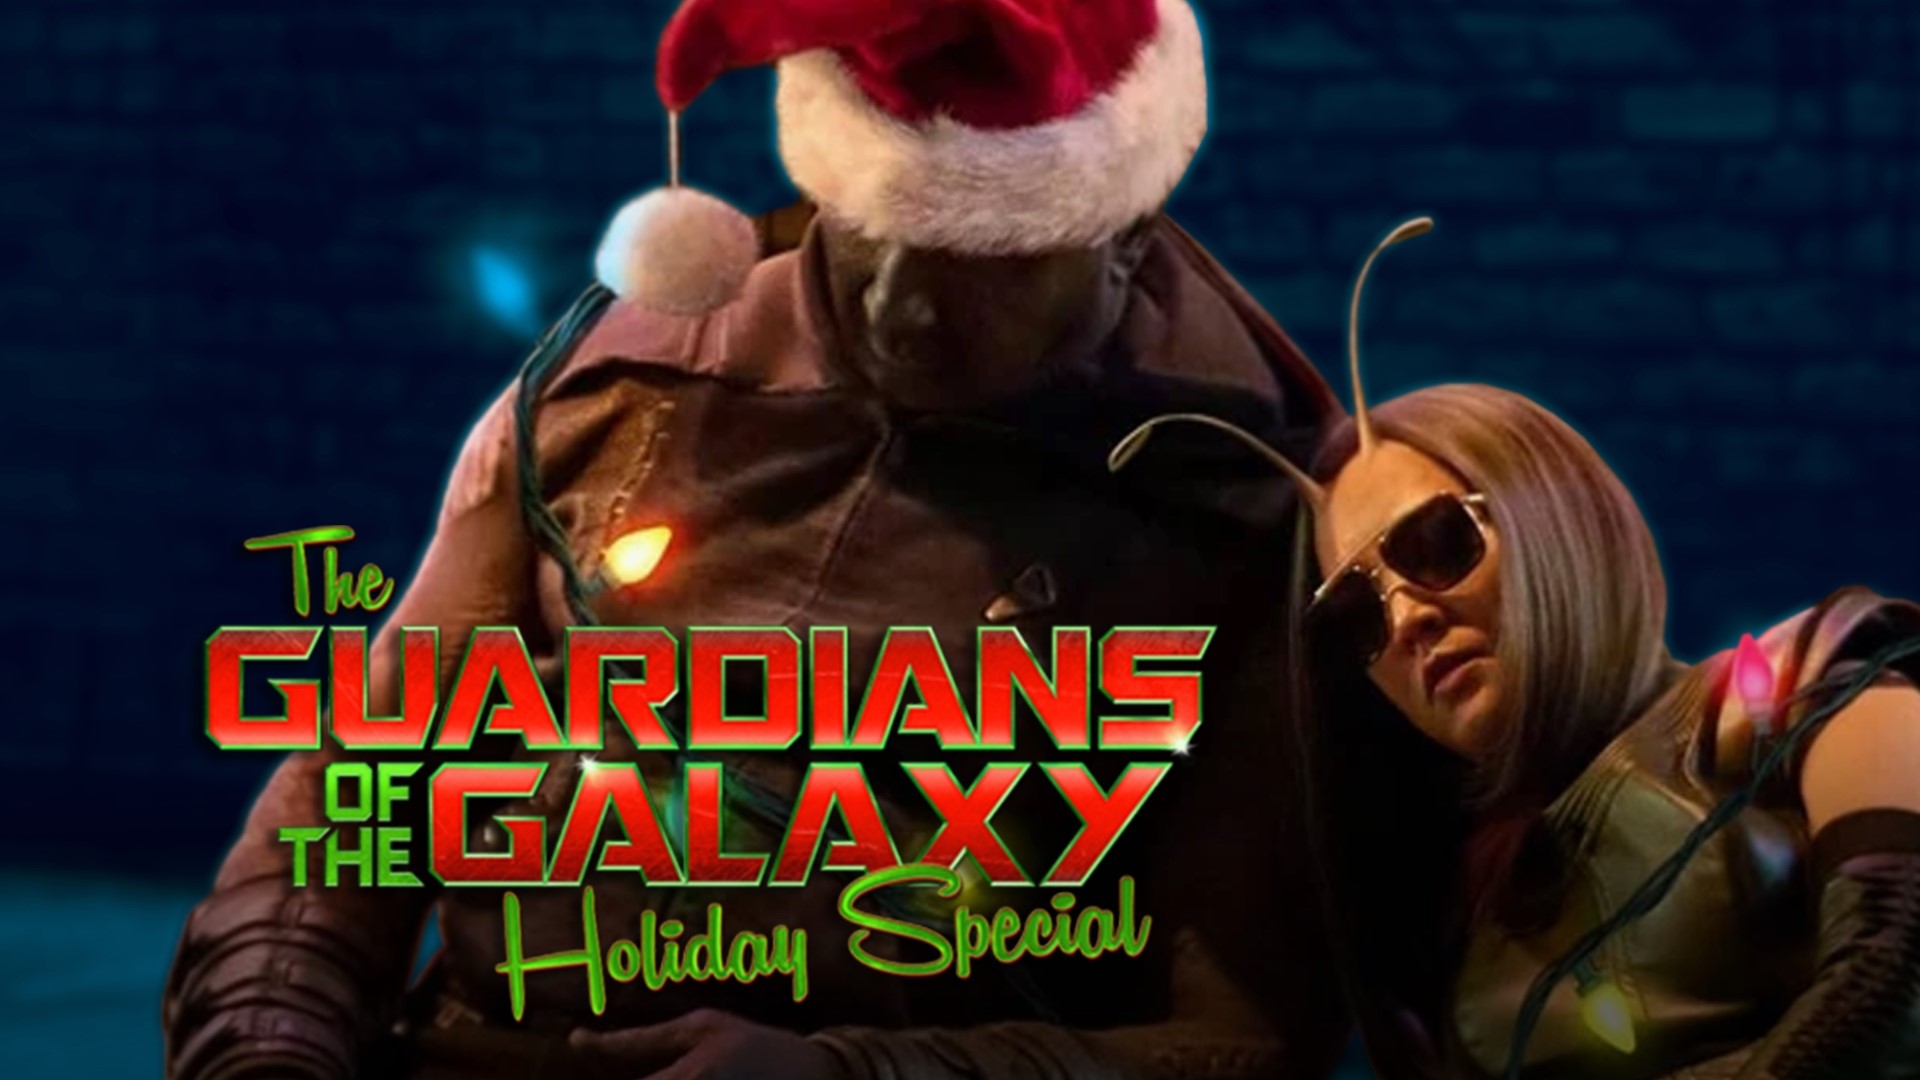 The Guardians of the Galaxy Holiday Special is a goofy goober of a special that celebrates what makes Drax, Mantis, and the rest of the crew so fun.